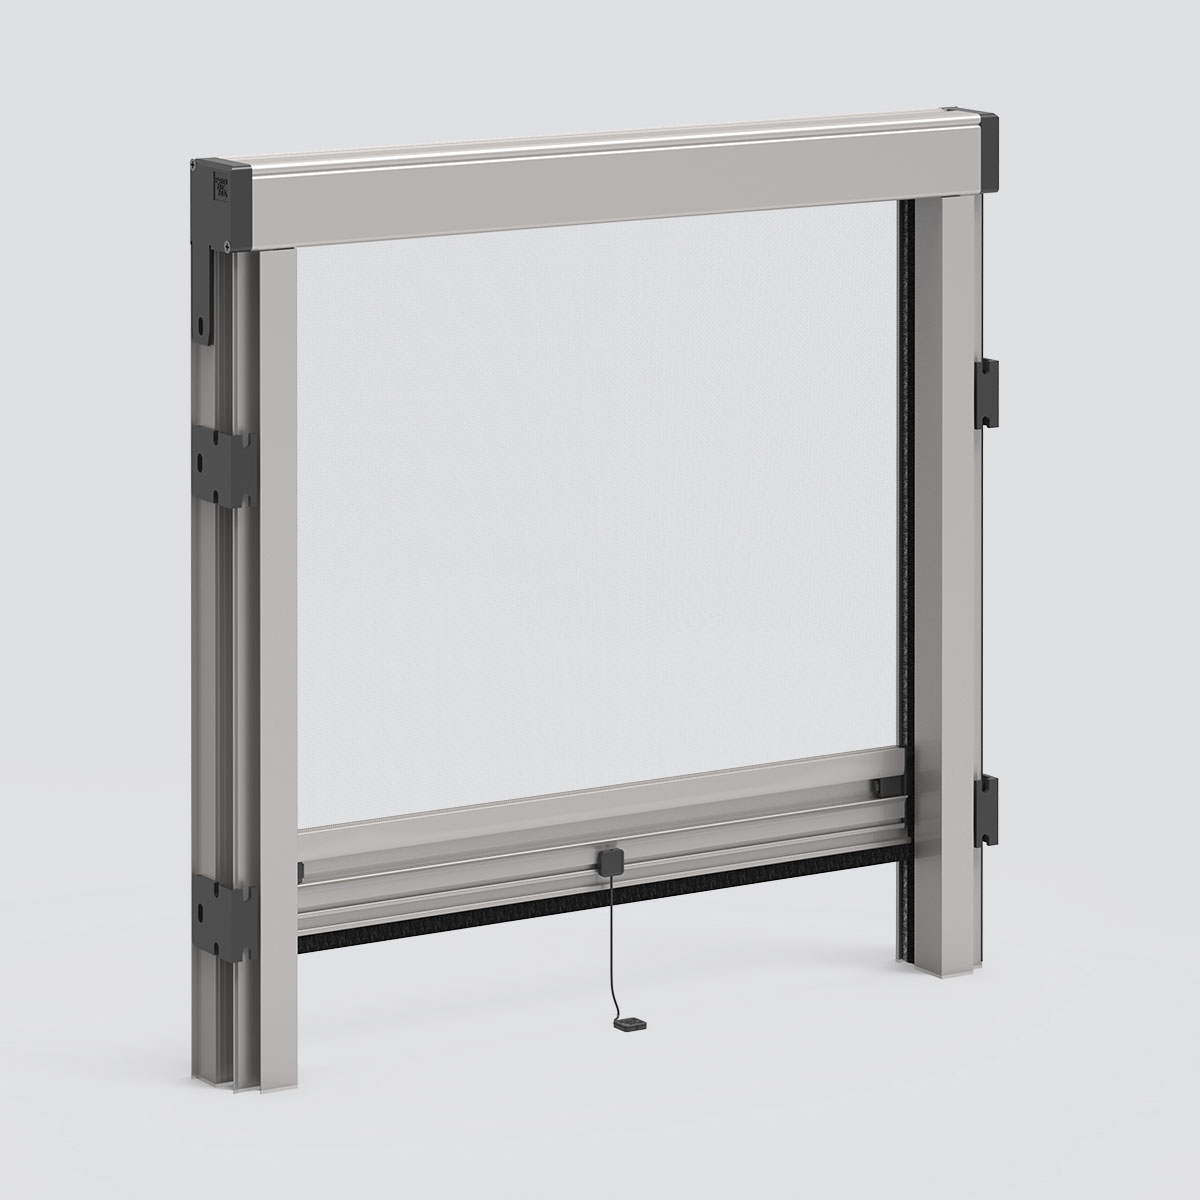 Spring-operated vertical 46i Plus insect screen, Incasso 46i Plus, Brackets. Pronema